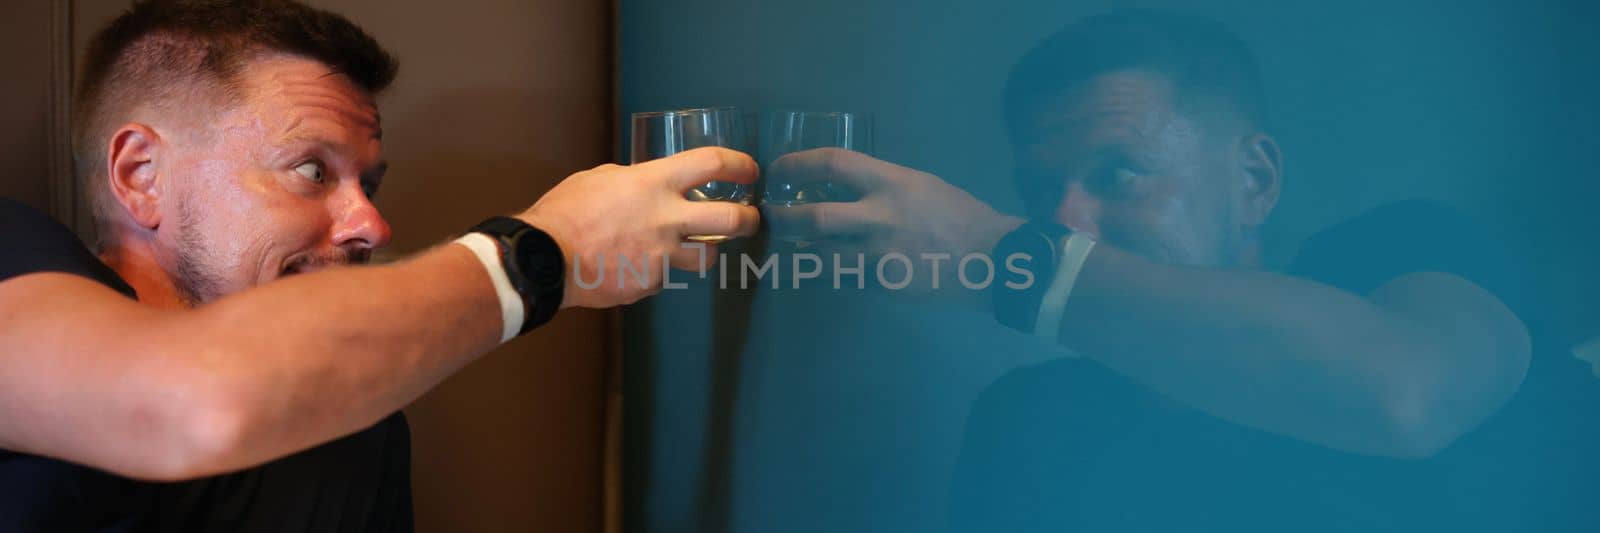 Man drinking whiskey with his reflection in mirror by kuprevich